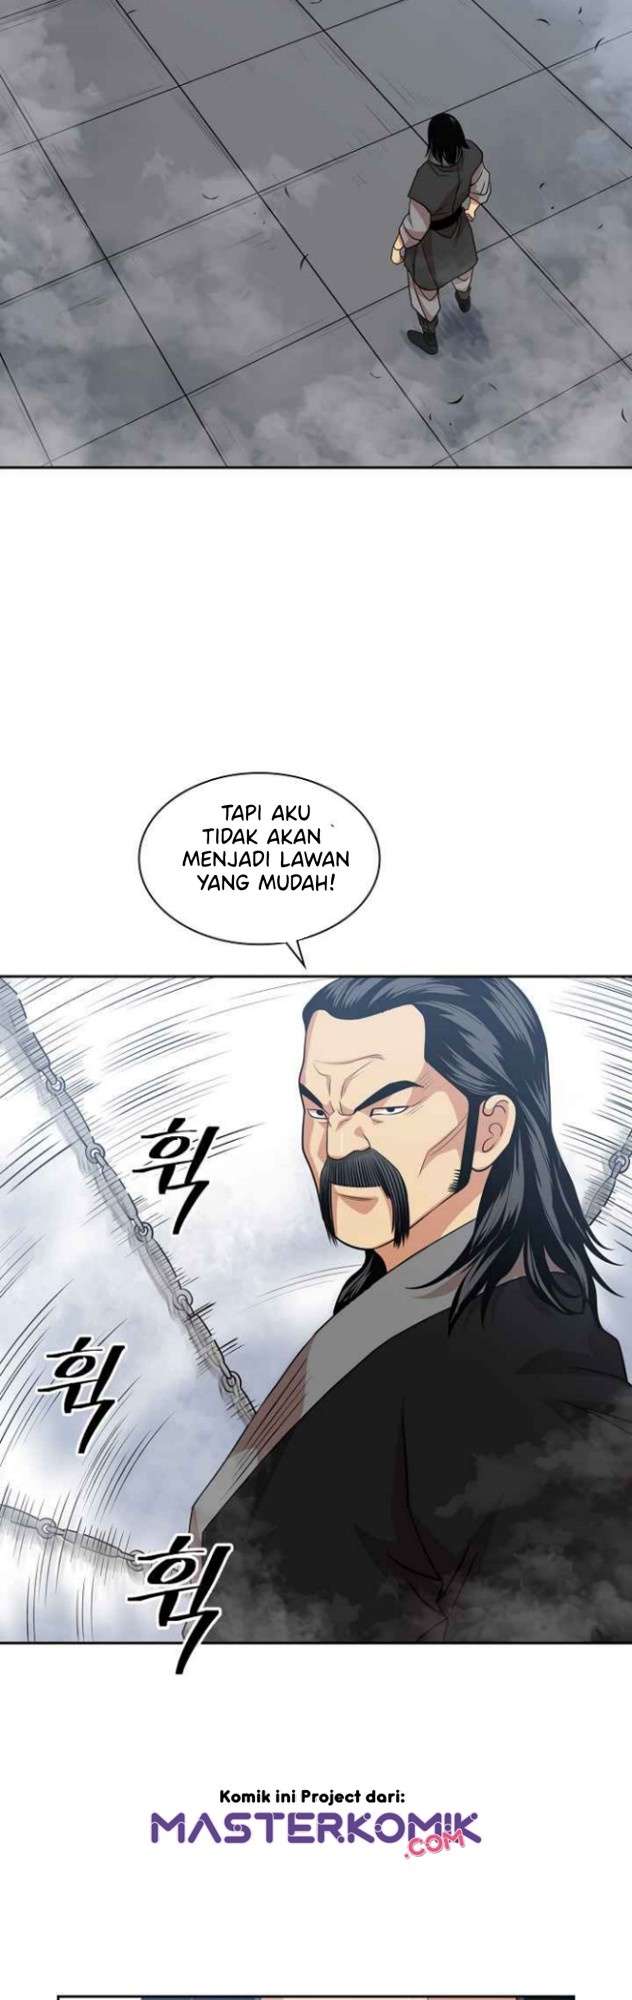 Record of the War God Chapter 102